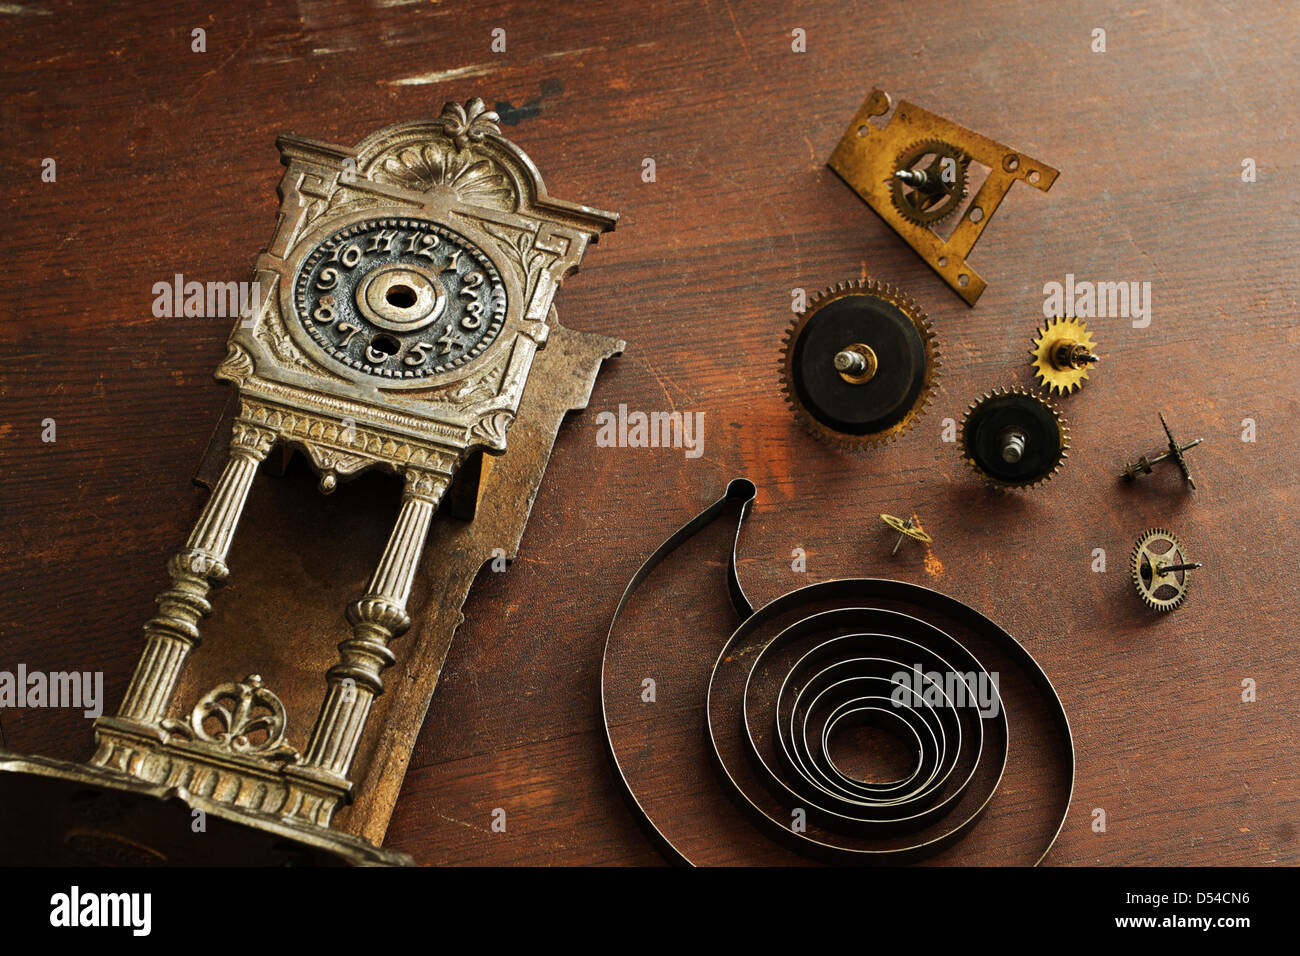 Old broken watches and parts to the clock on a wooden surface Stock Photo